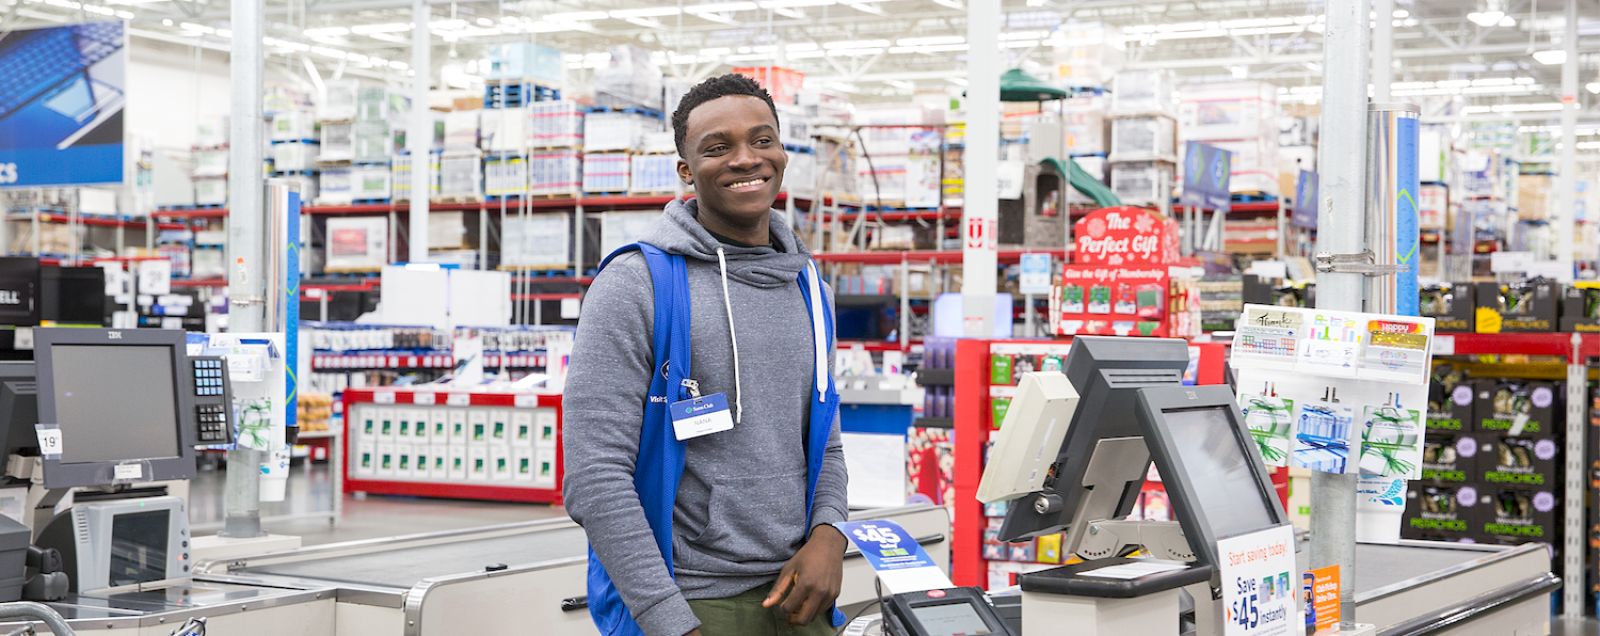 Working at Sam's Club  Great Place To Work®